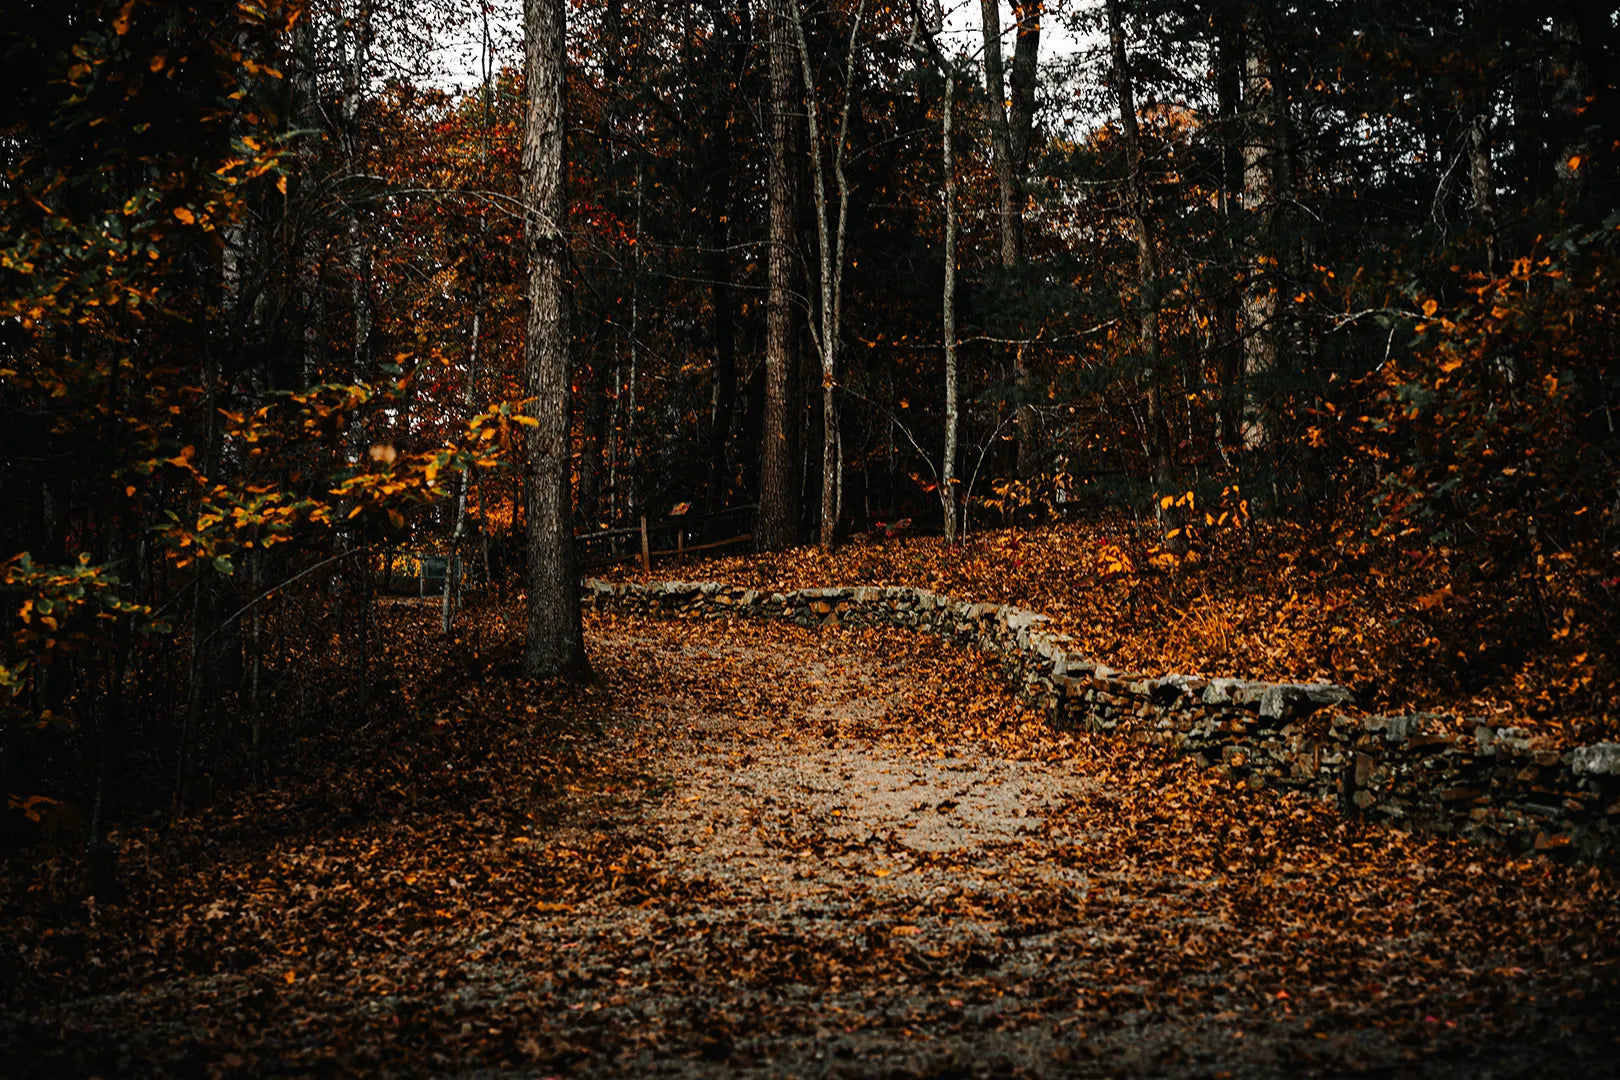 A winding forest path covered in fallen autumn leaves, surrounded by trees with a stone wall on one side.